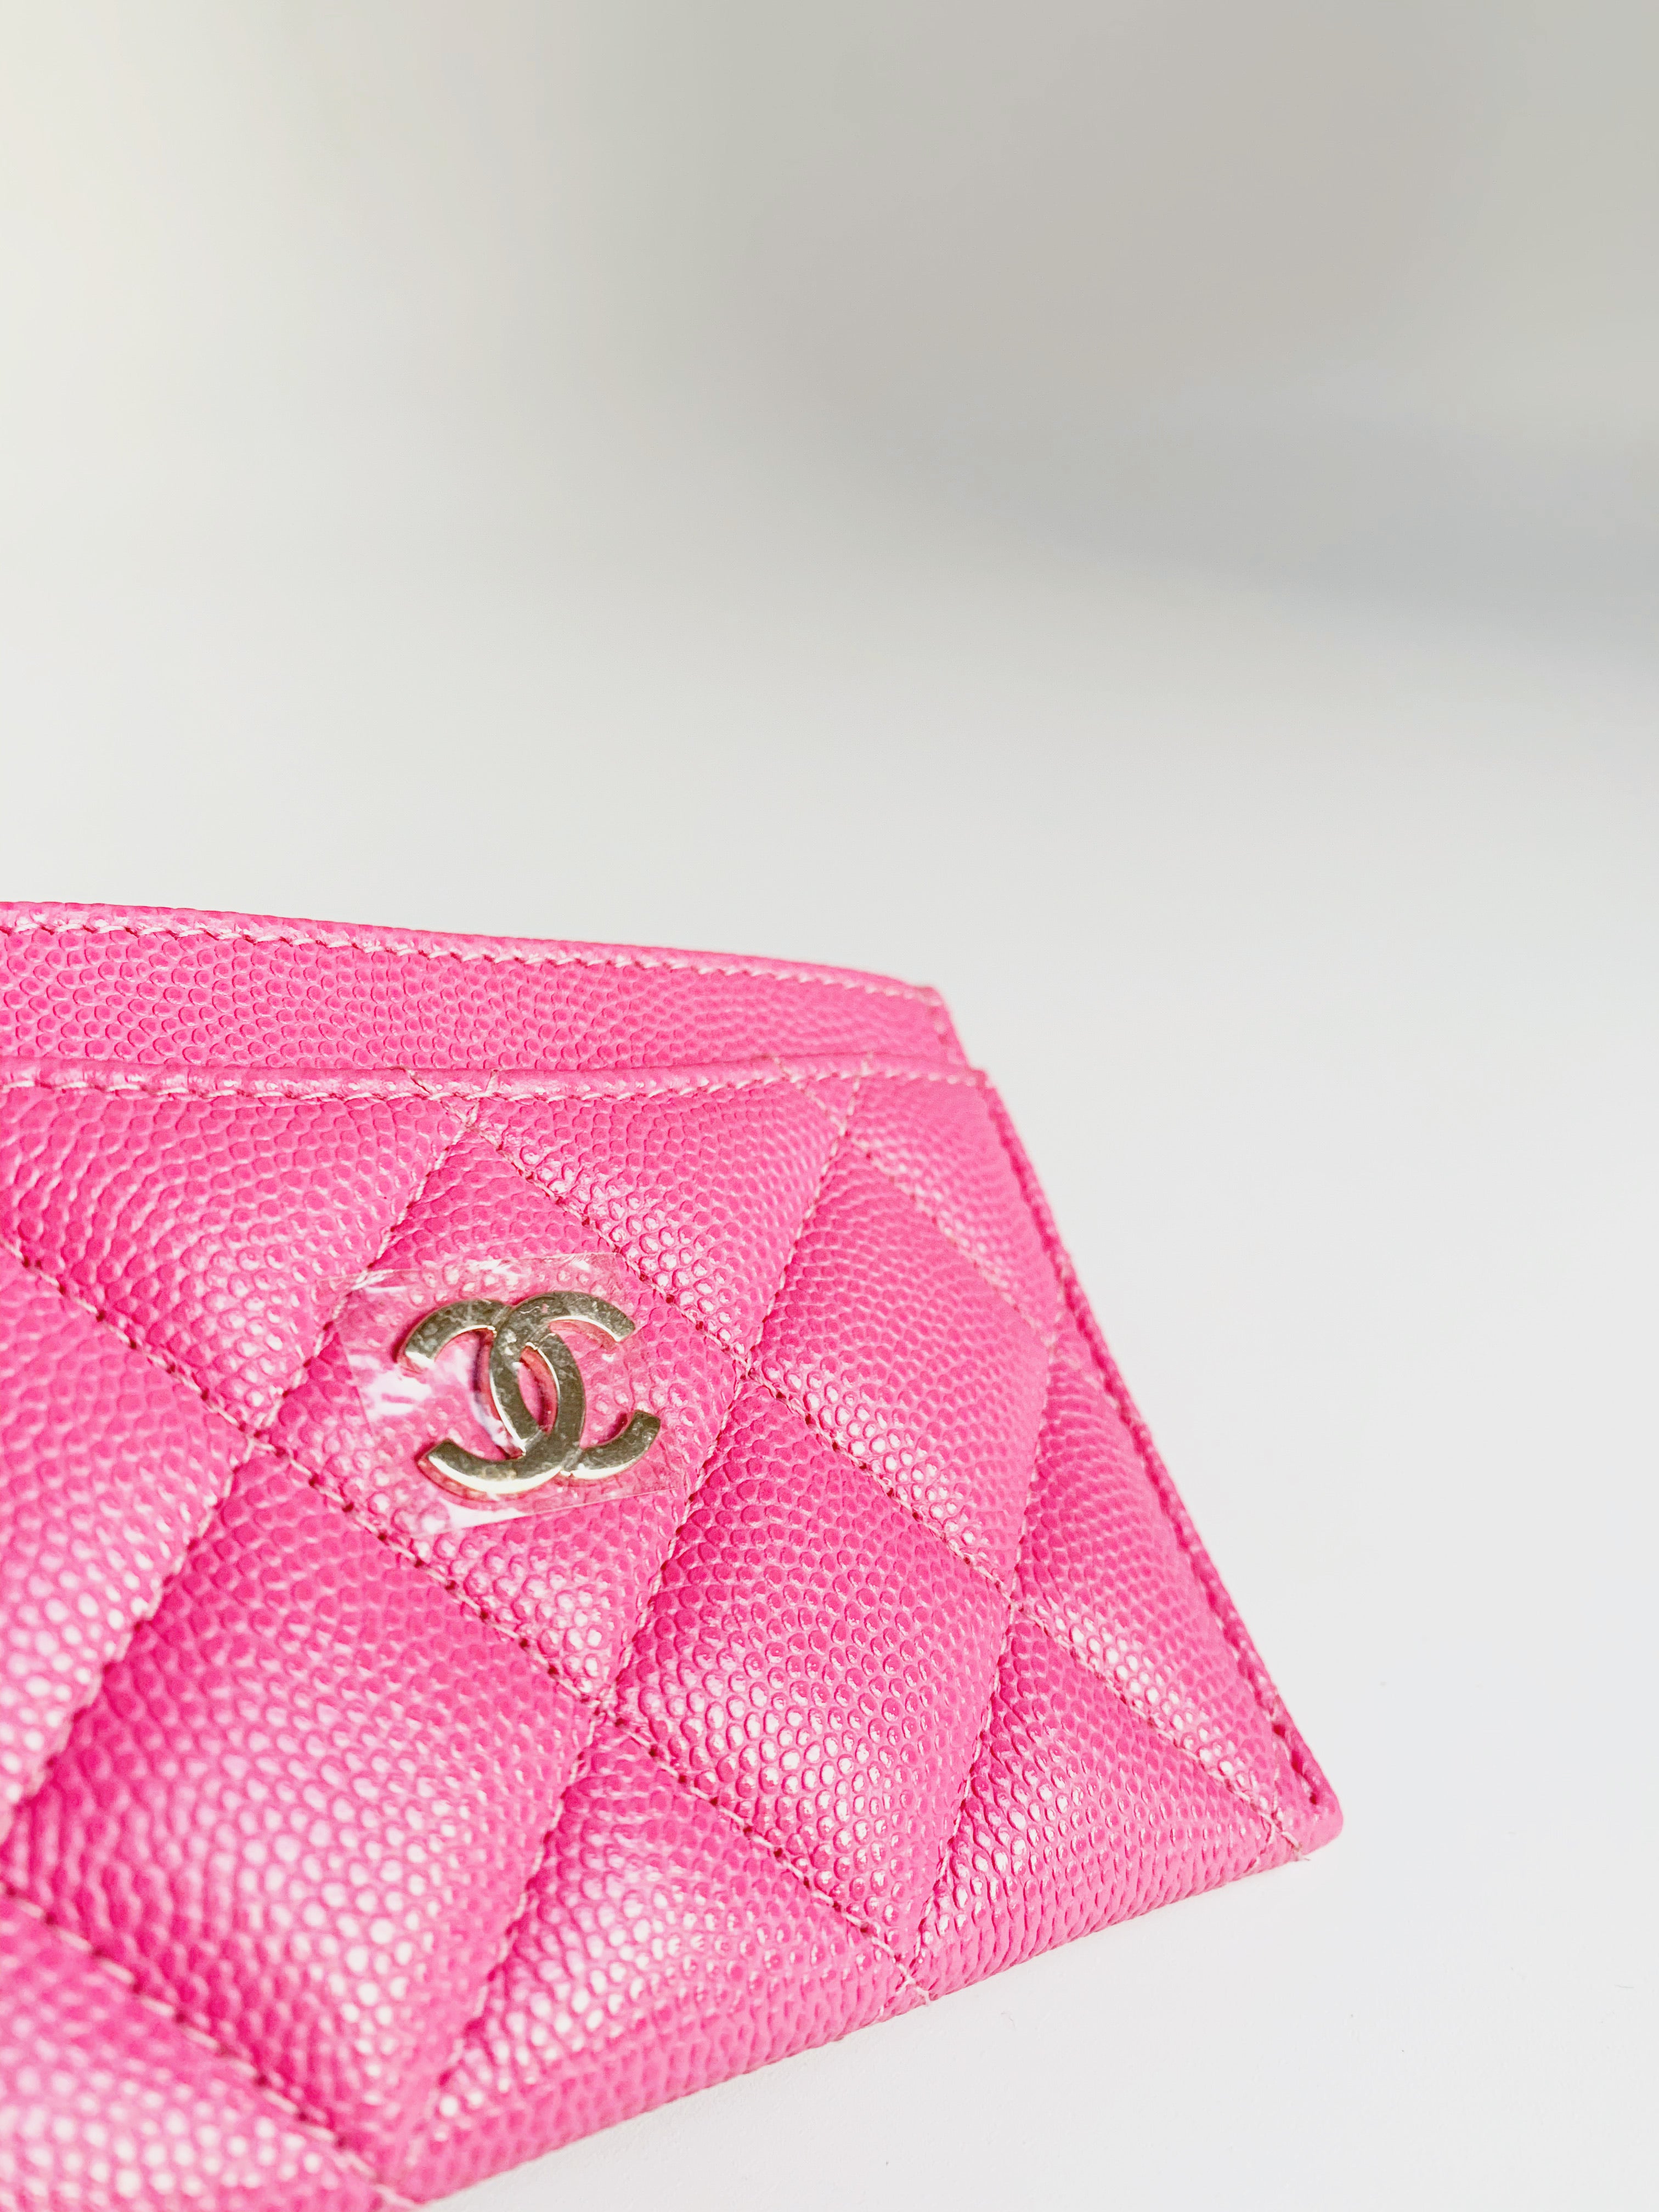 CHANEL, Accessories, Chanel 9 Pink Cardholder